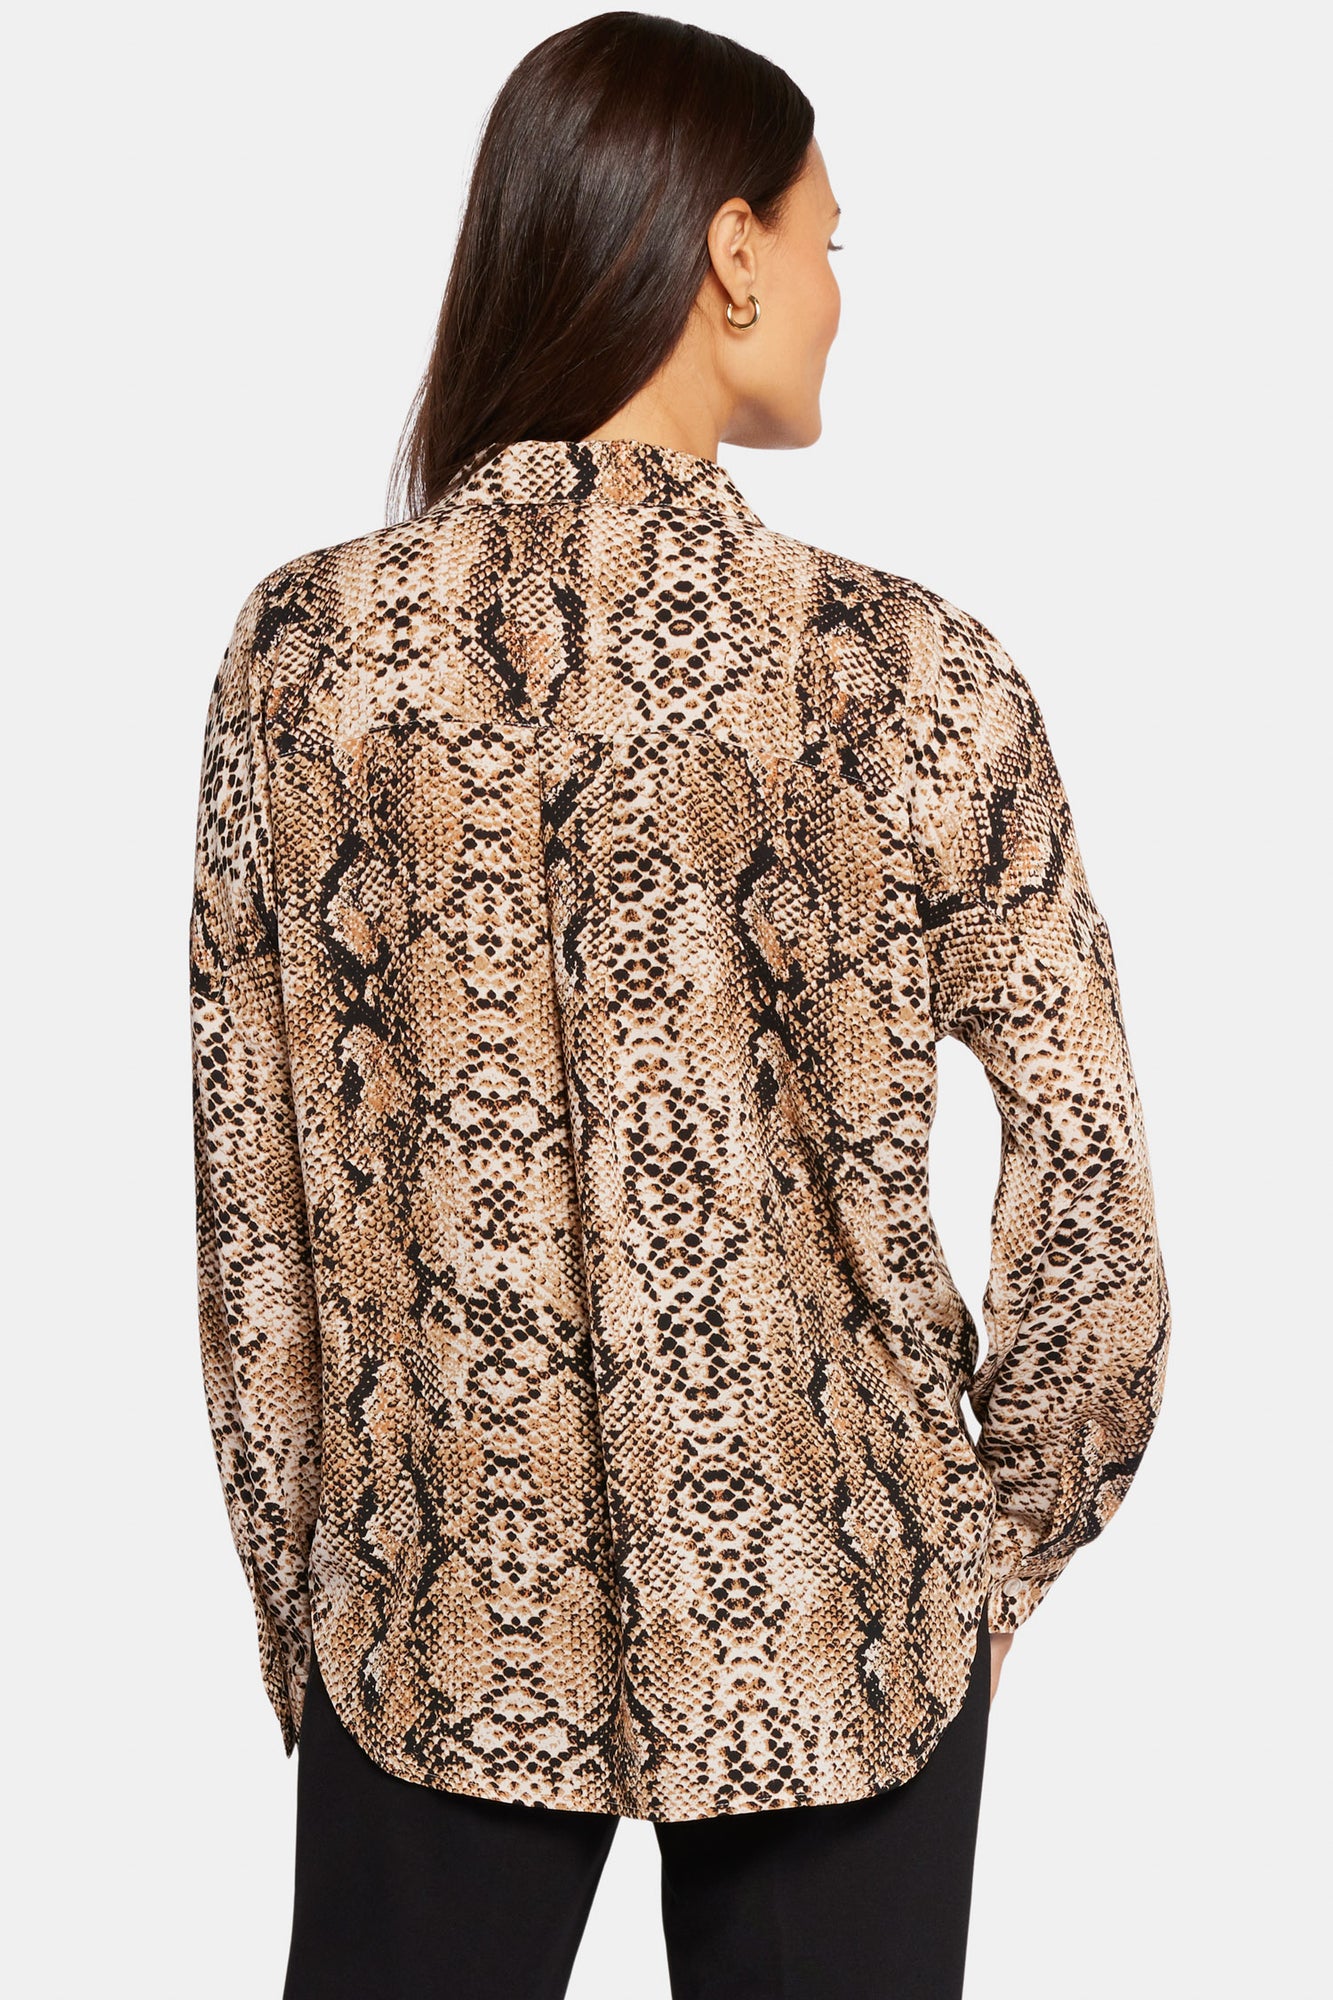 NYDJ Becky Blouse  - Victorian Python Pink Taupe